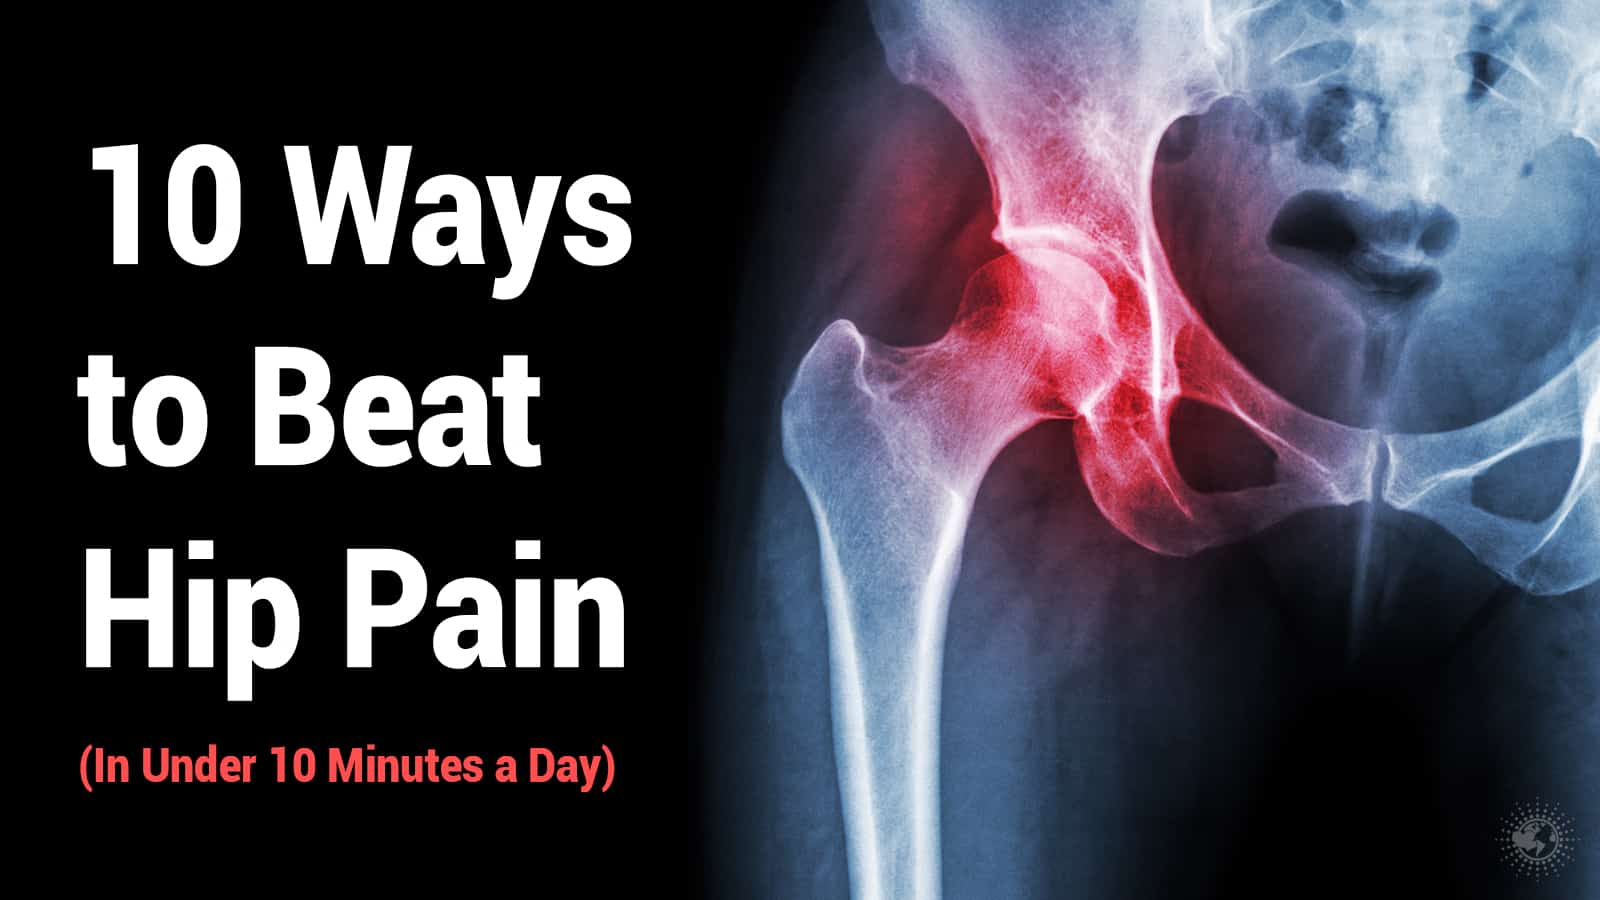 10 Ways to Beat Hip Pain (In Under 10 Minutes a Day)